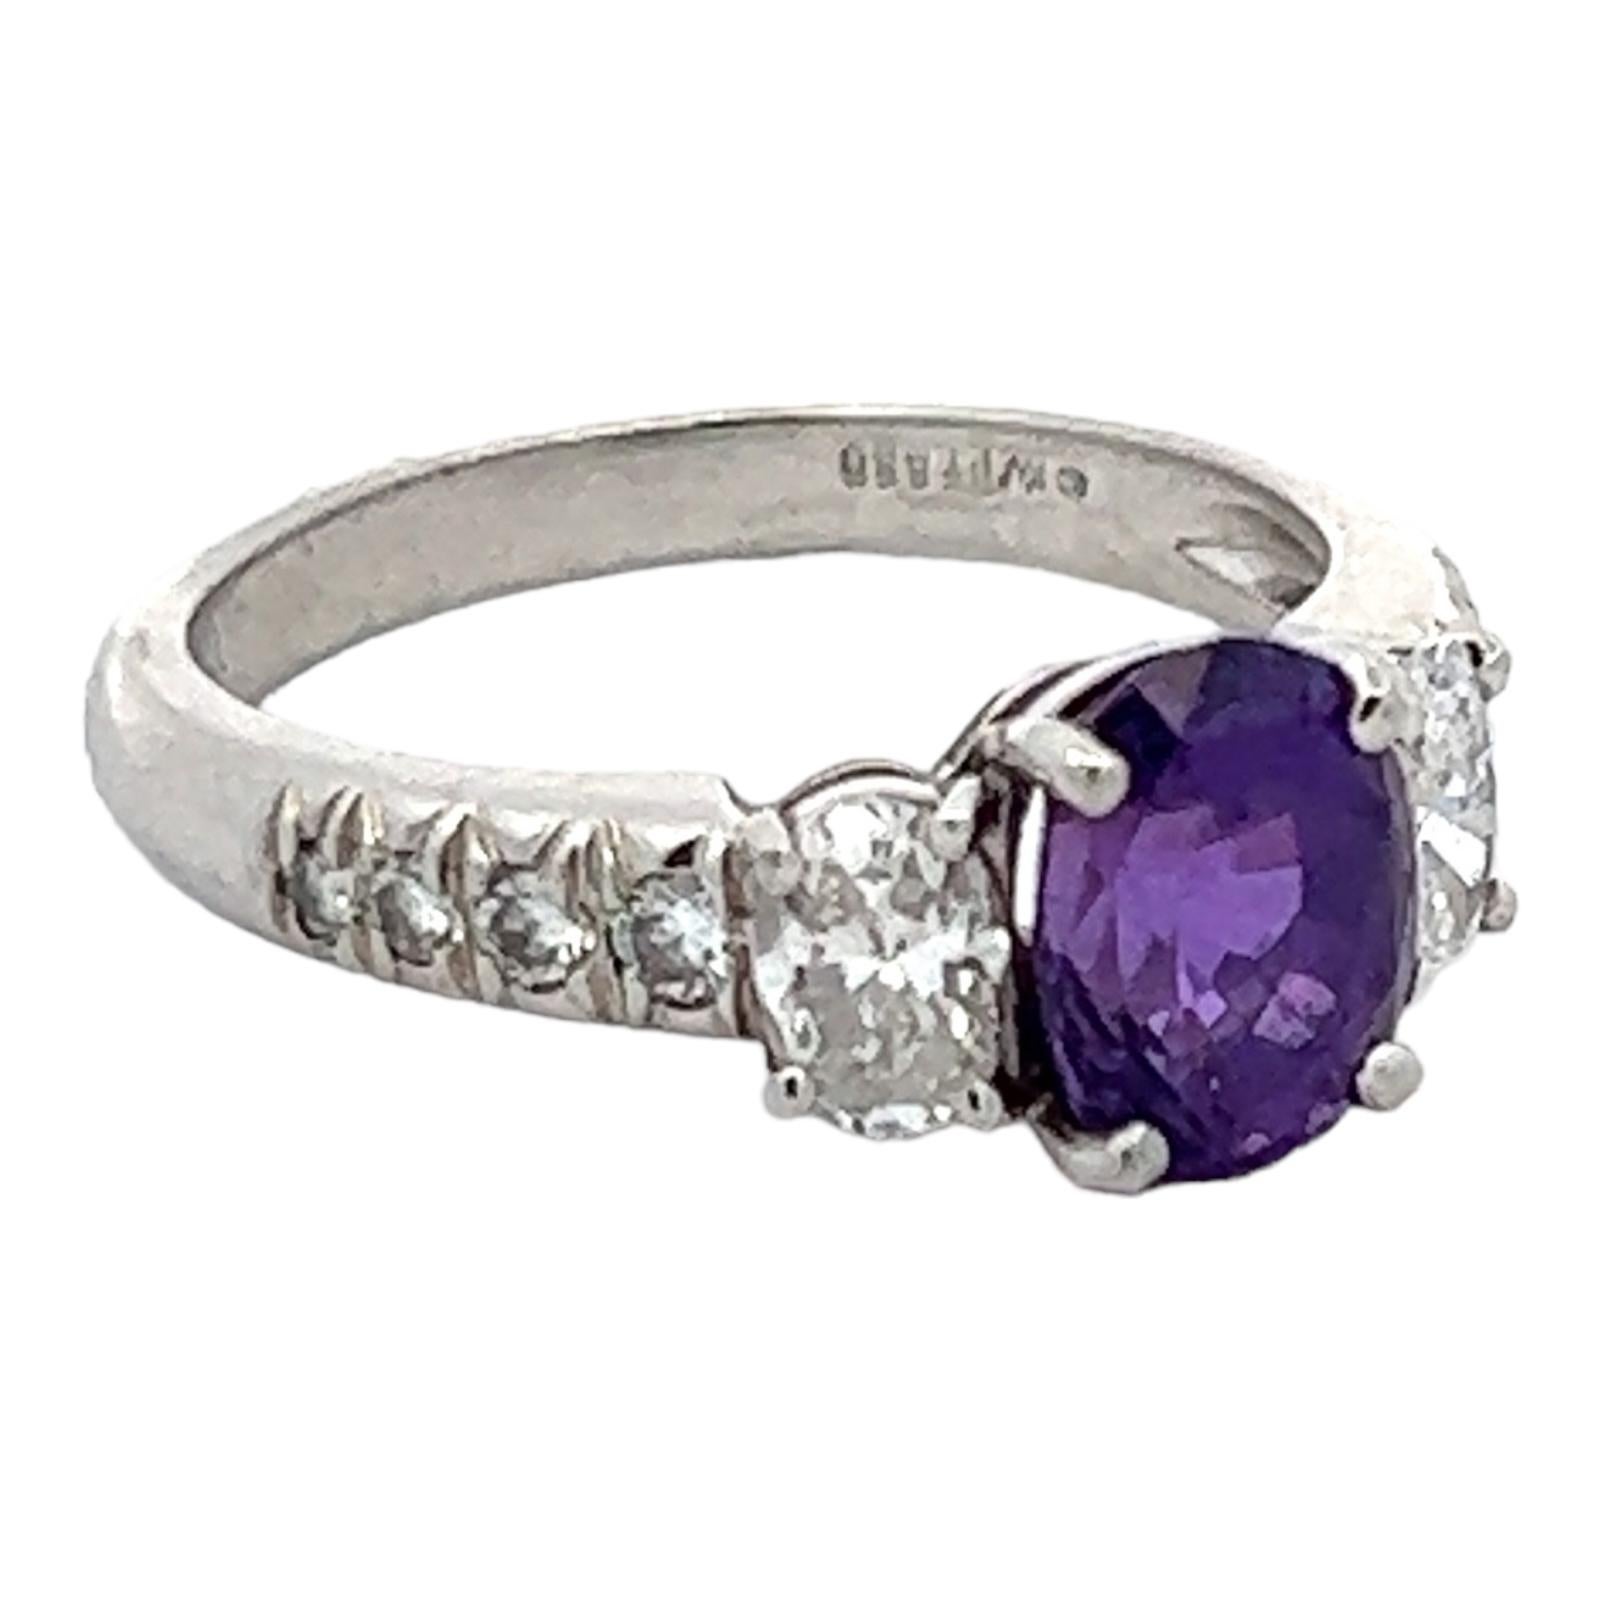 Unique natural violet color sapphire diamond ring handcrafted in platinum. The ring features an oval violet sapphire gemstone weighing approximately 1.00 carat. The sapphire is flanked by two oval diamonds weighing approximately .50 CTW and another